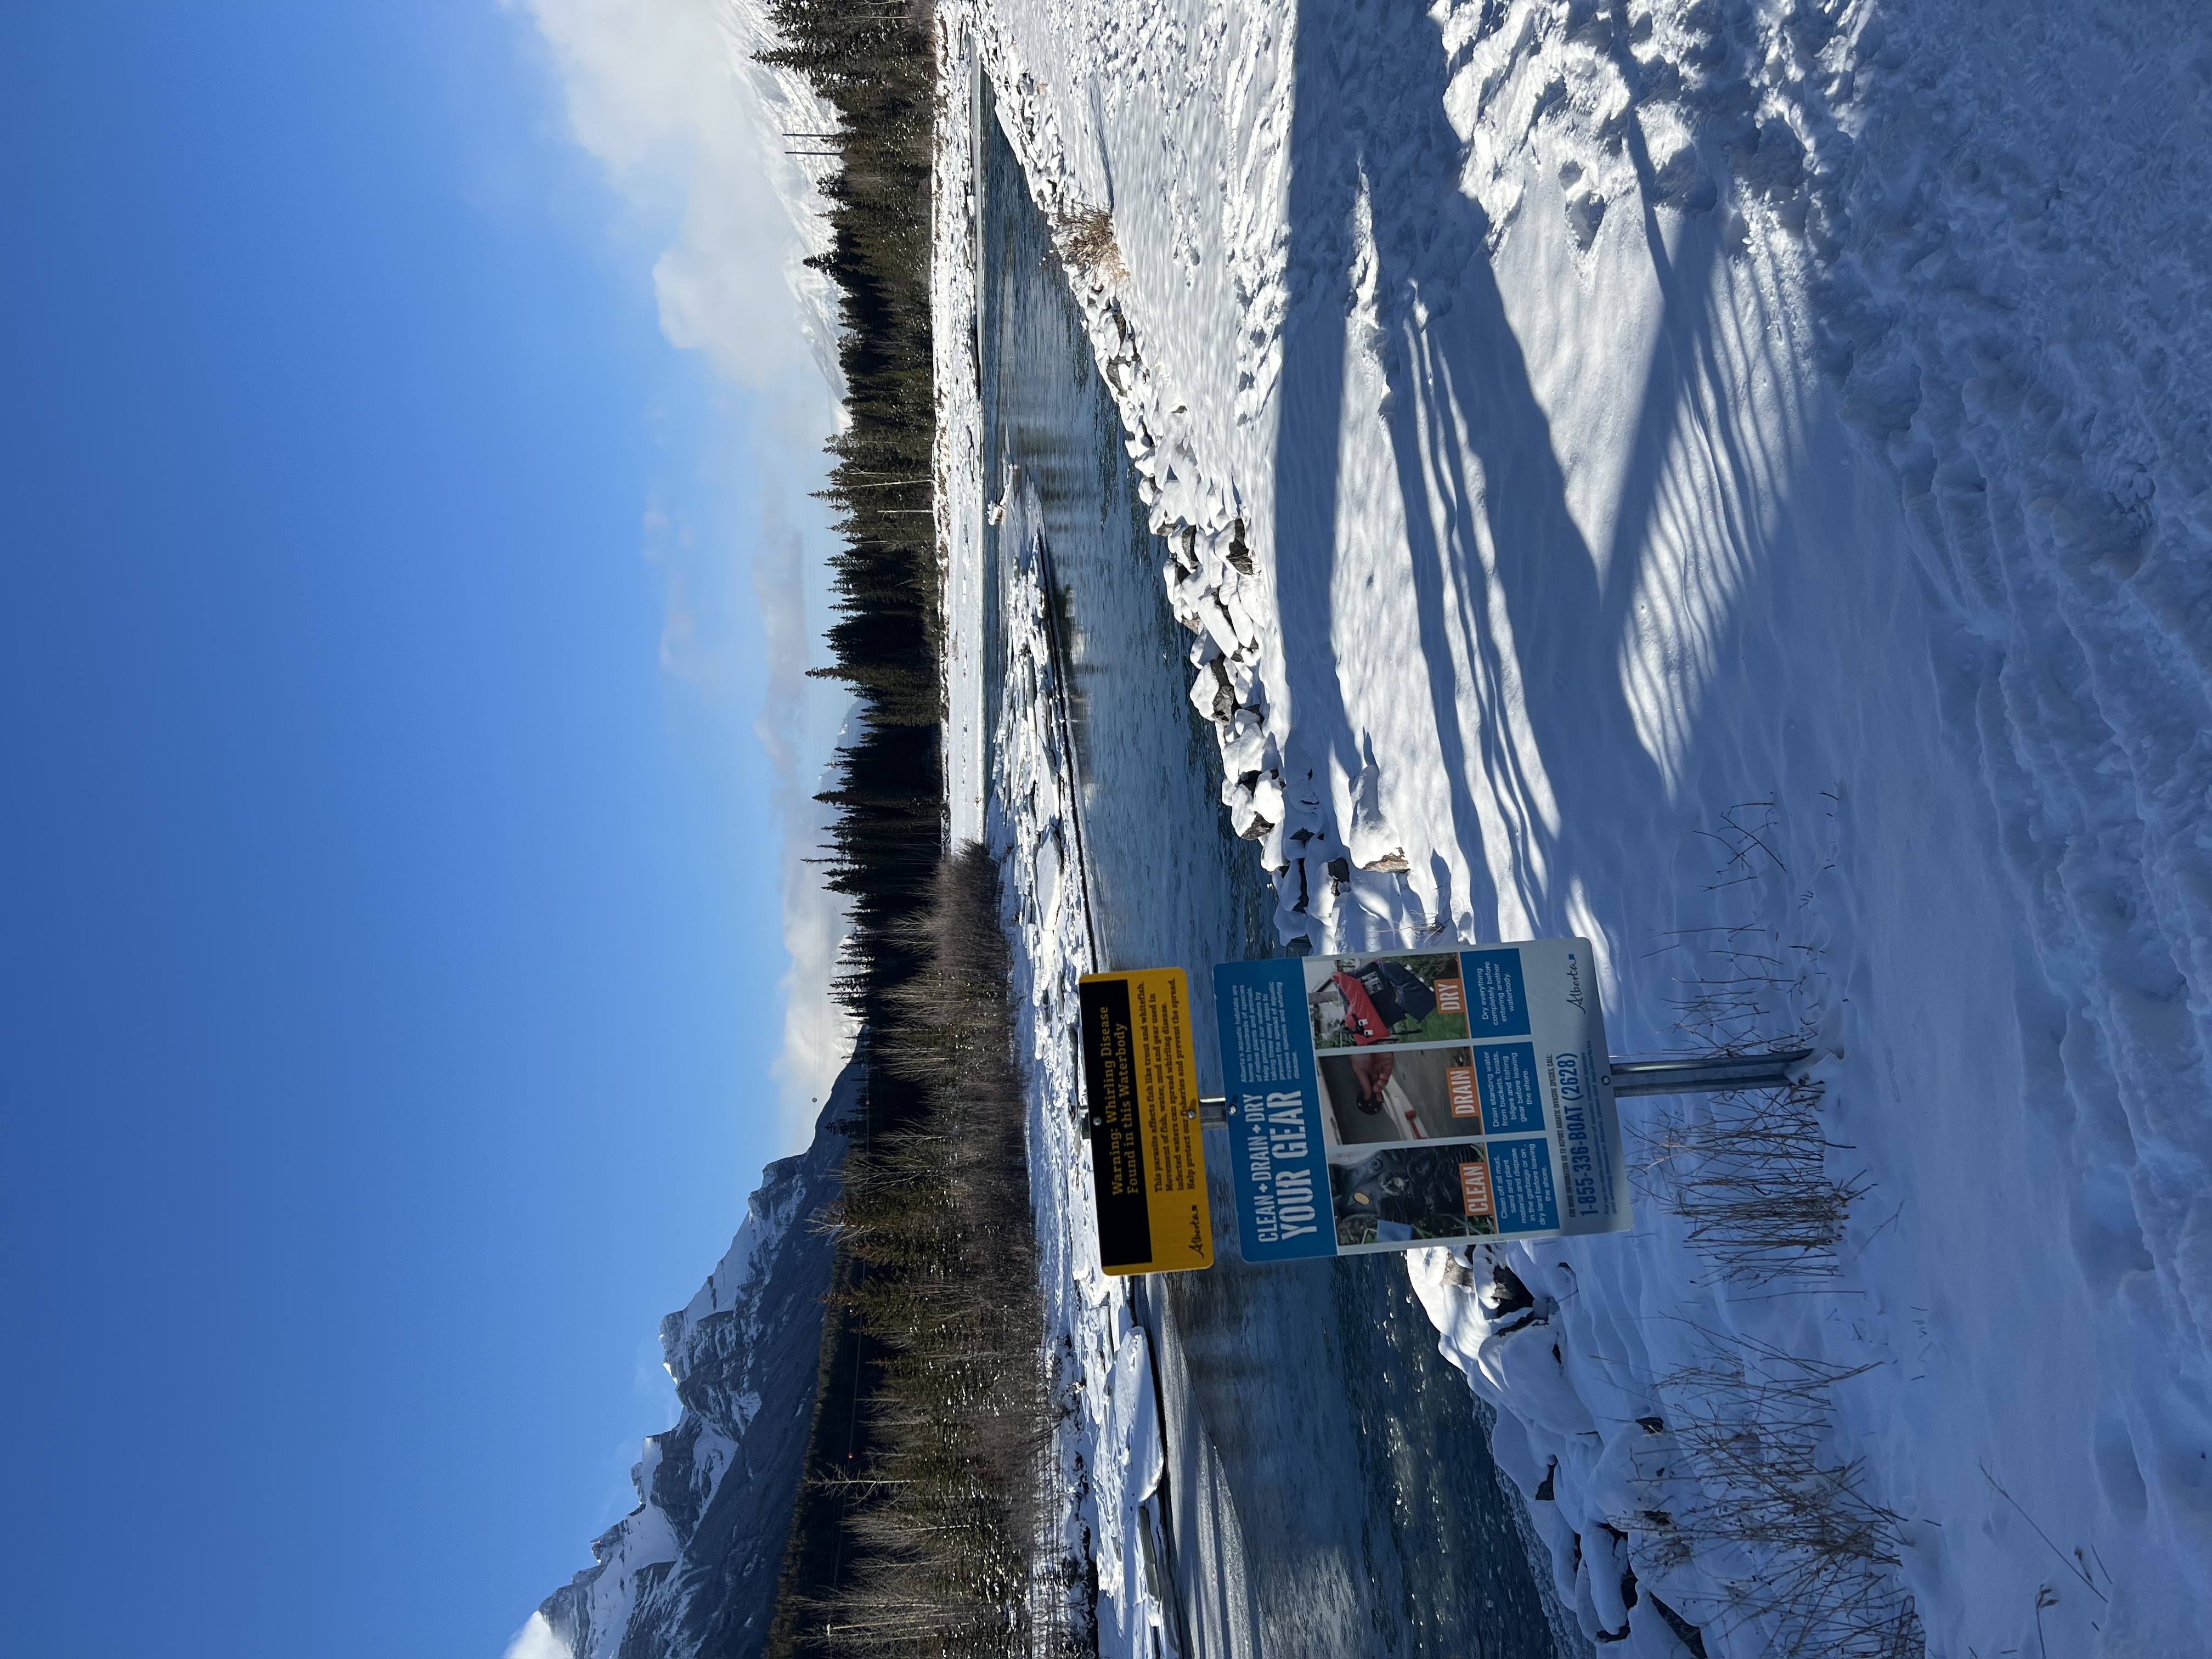 Start of the Canmore Engine Bridge. Image of the right hand side showing warning signs, snow on ground, river, trees and blue sky in background.